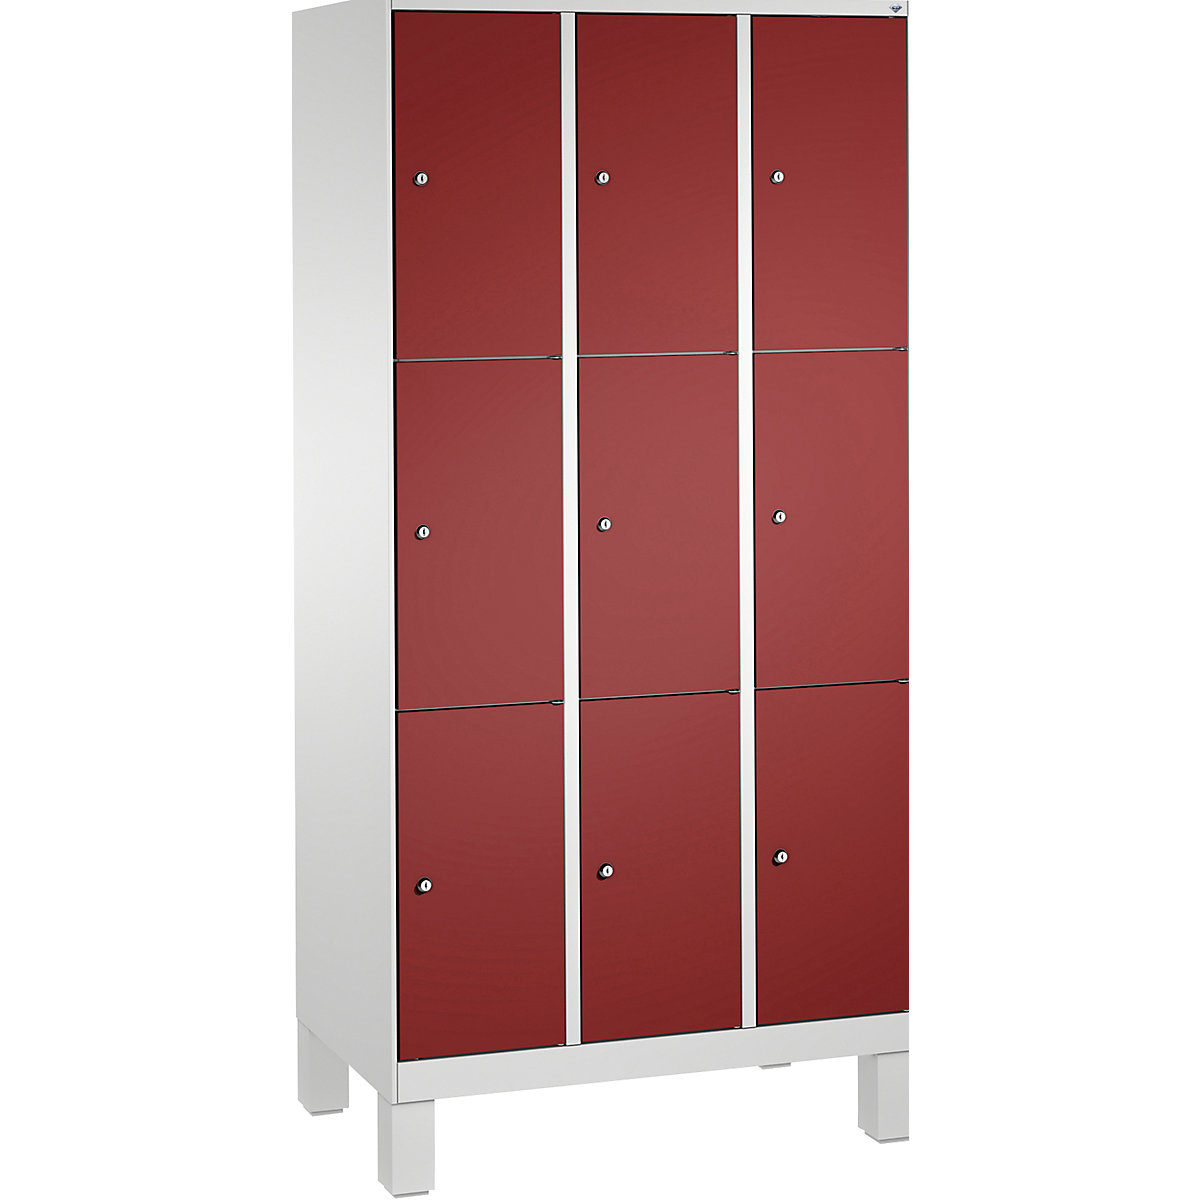 EVOLO locker unit, with feet – C+P, 3 compartments, 3 shelf compartments each, compartment width 300 mm, light grey / ruby red-12